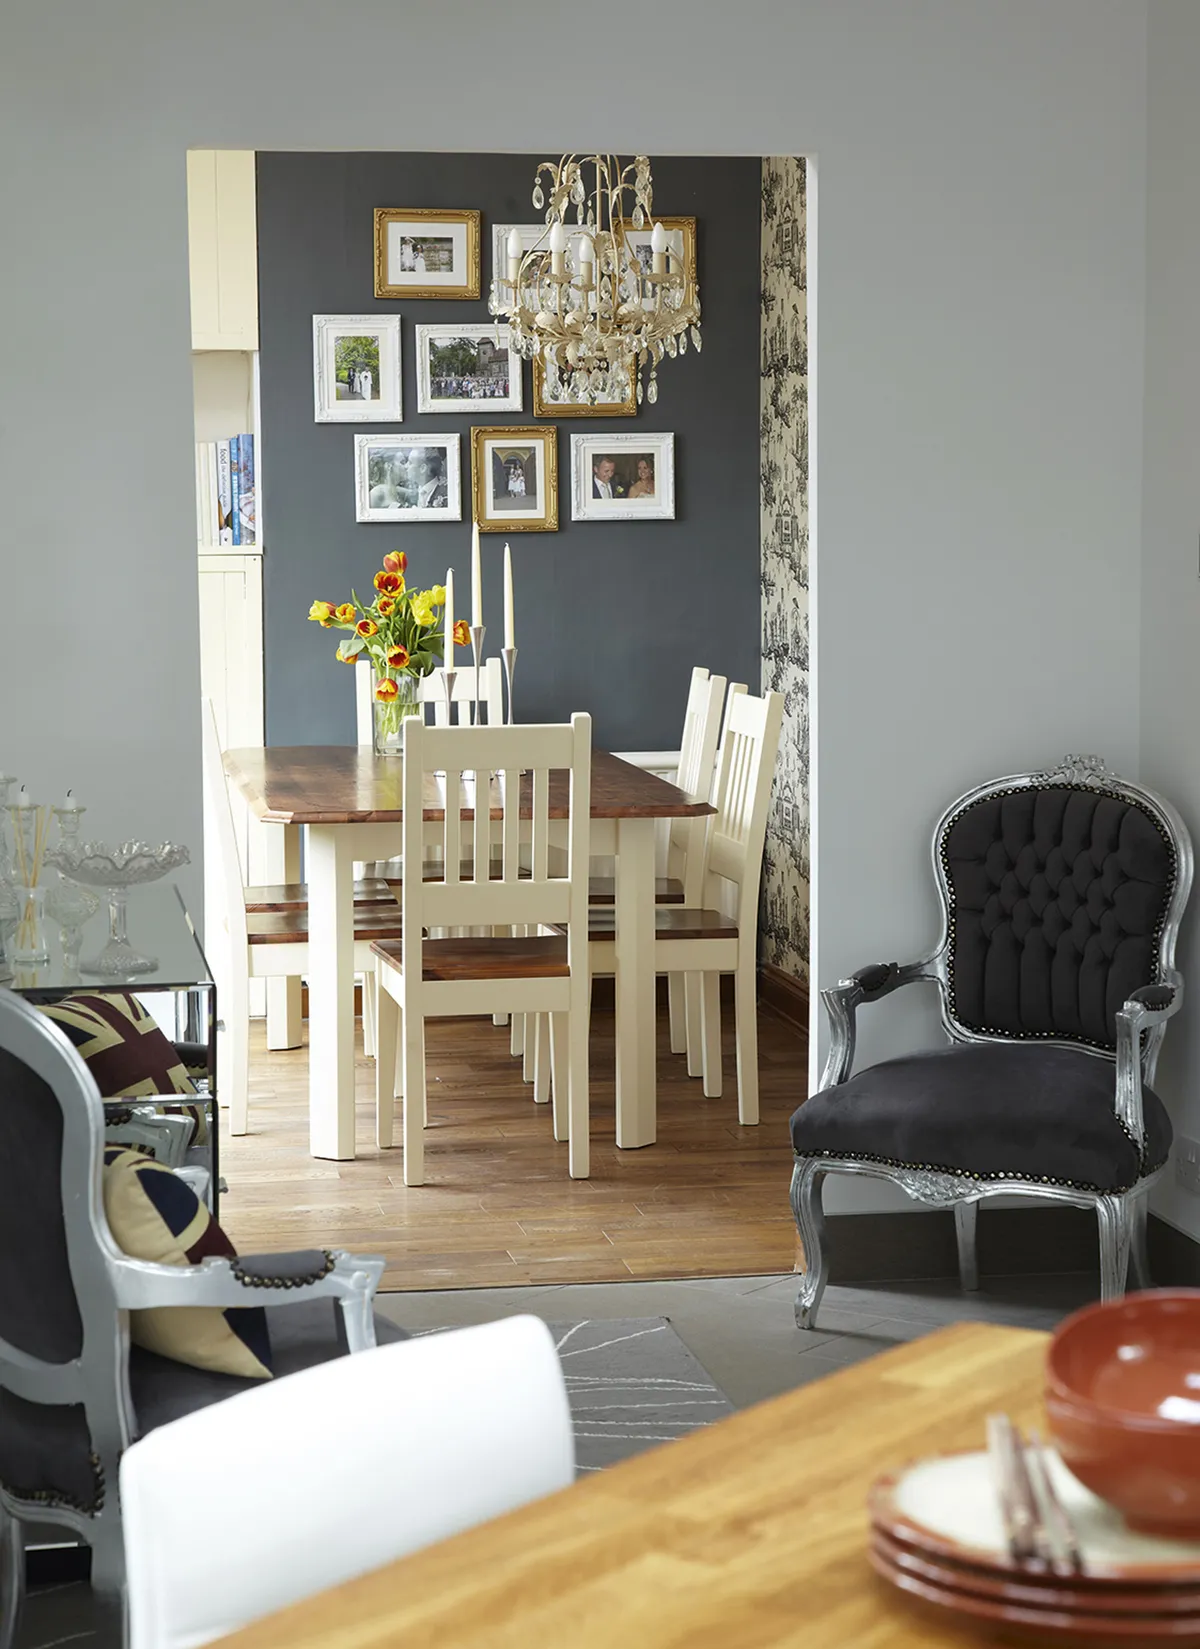 Julie has incorporated the same grey palette in her kitchen and dining area to tie the spaces together, going darker in the dining room for a cosier feel